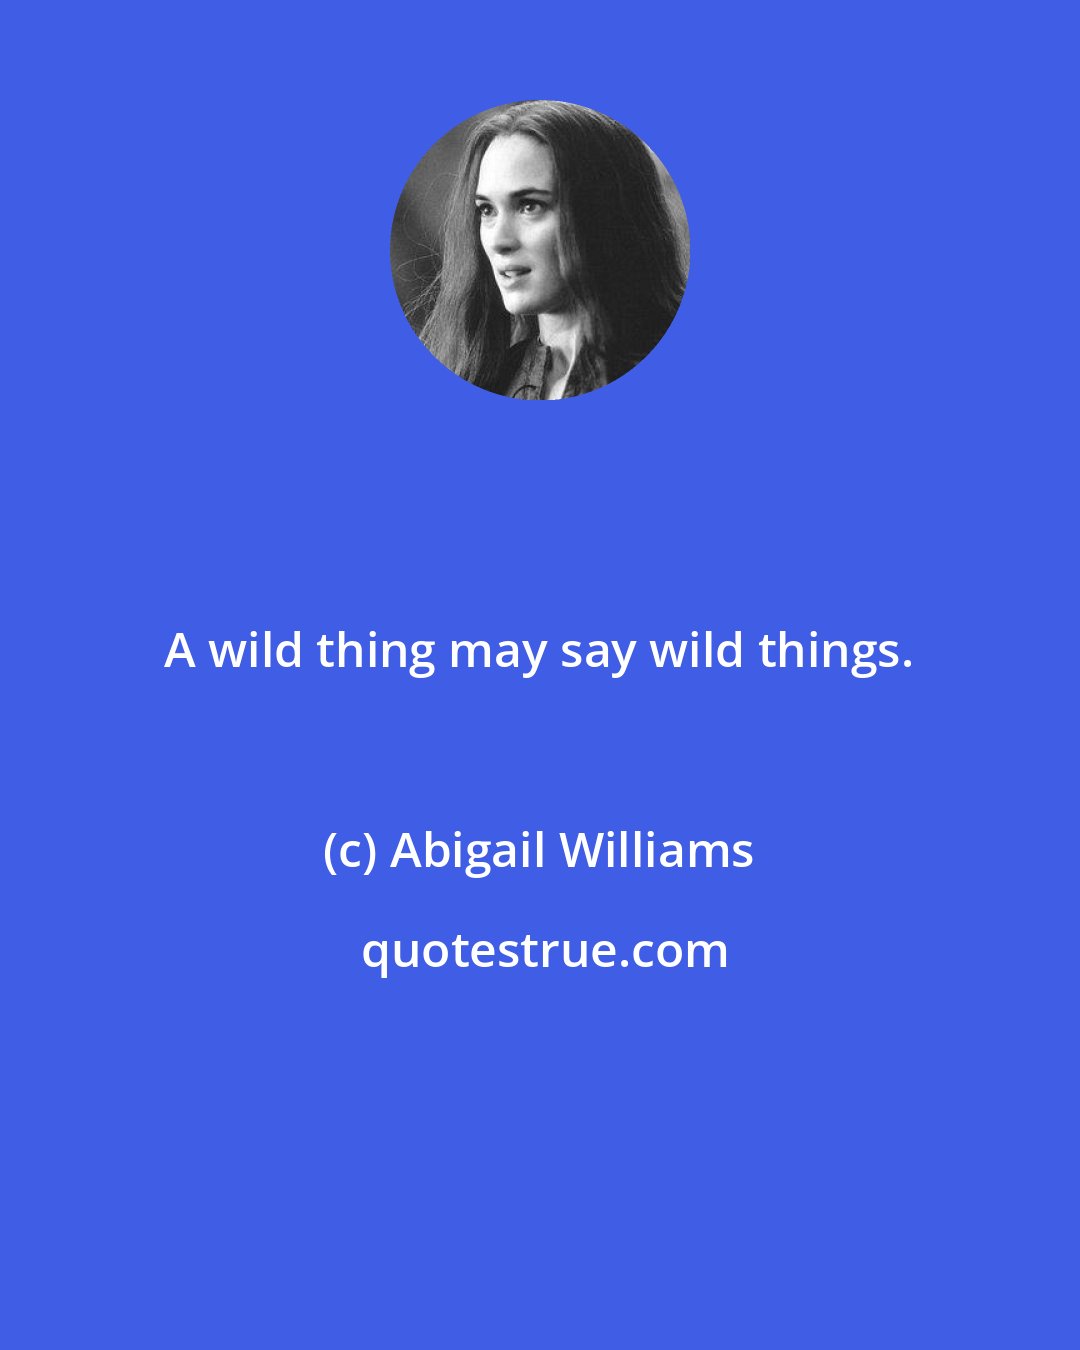 Abigail Williams: A wild thing may say wild things.